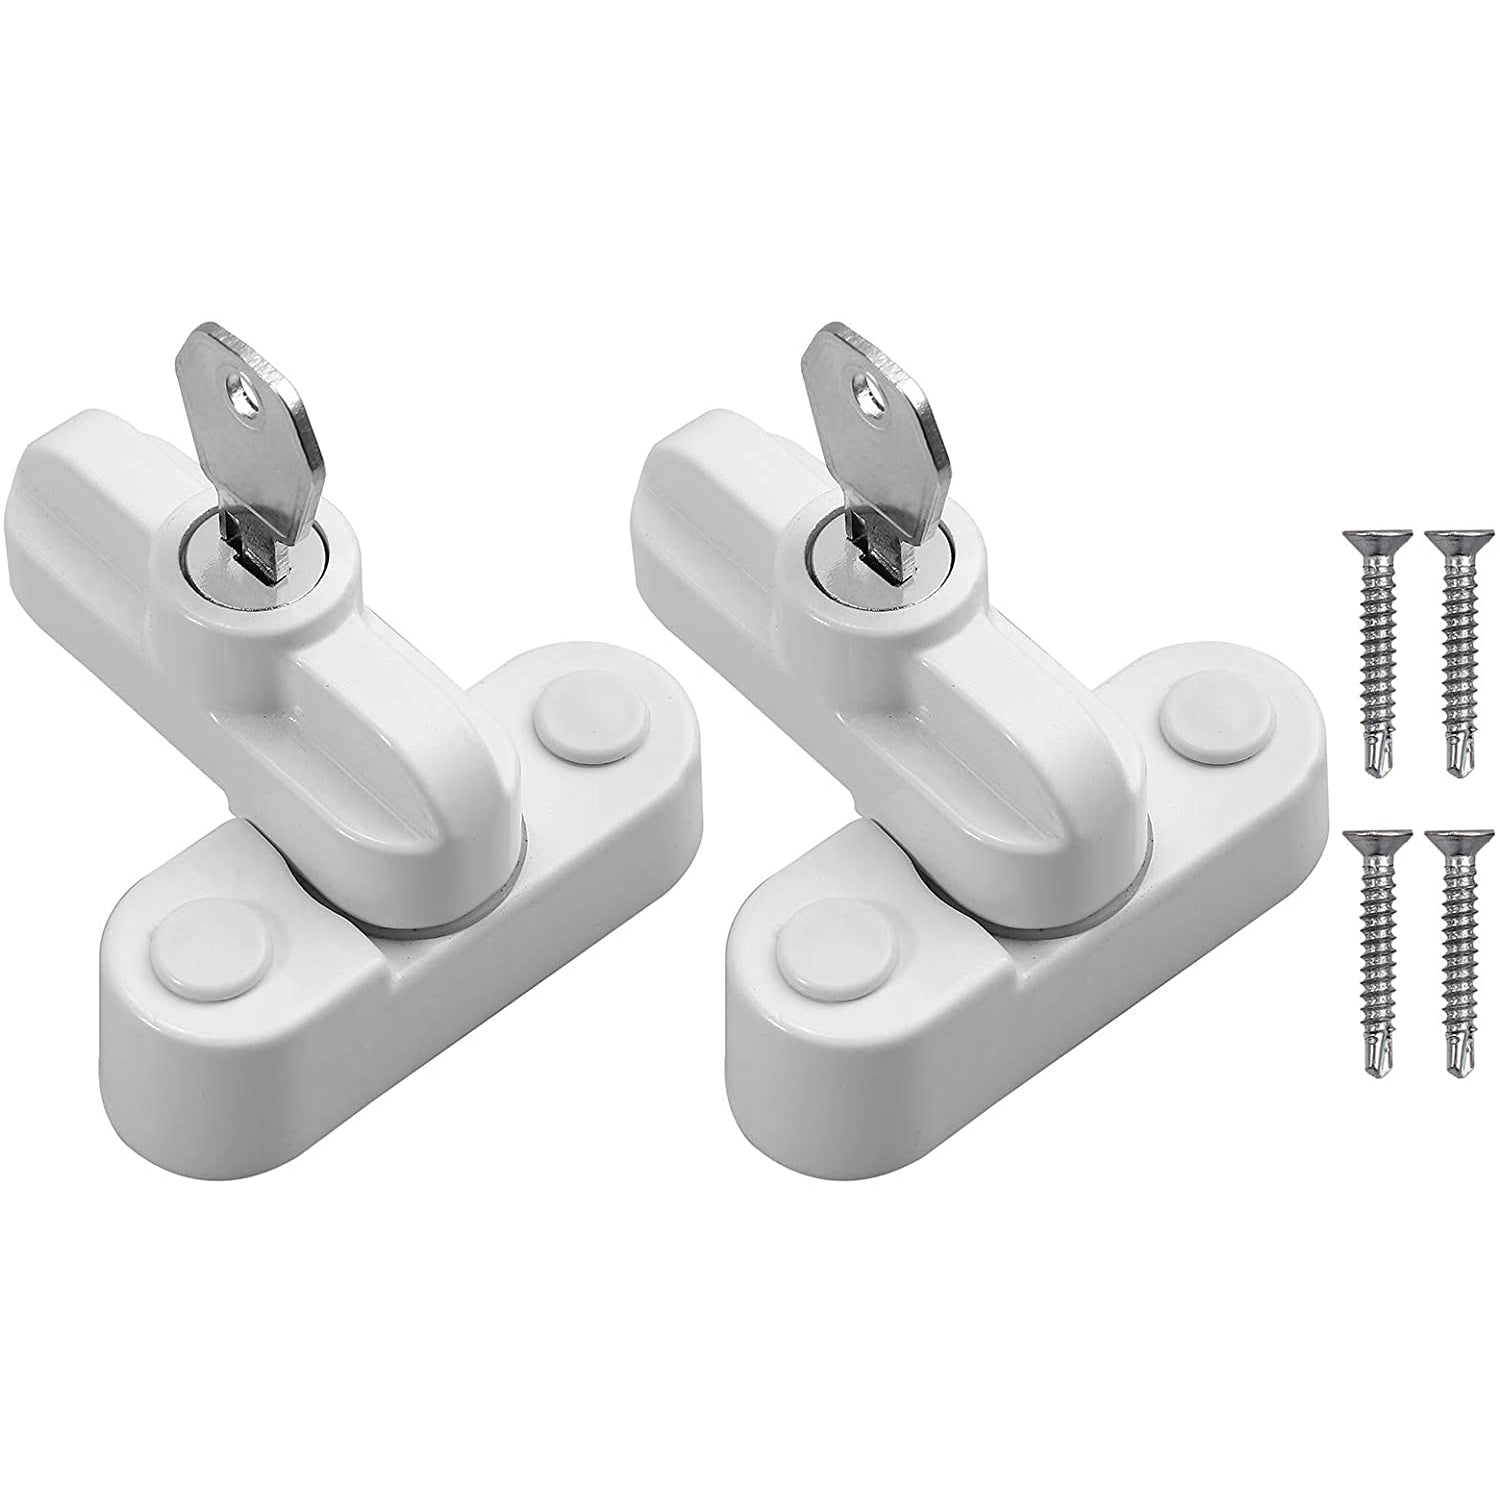 2pcs Window & Fridge Lock With Stainless Steel Cable & 2 Packs